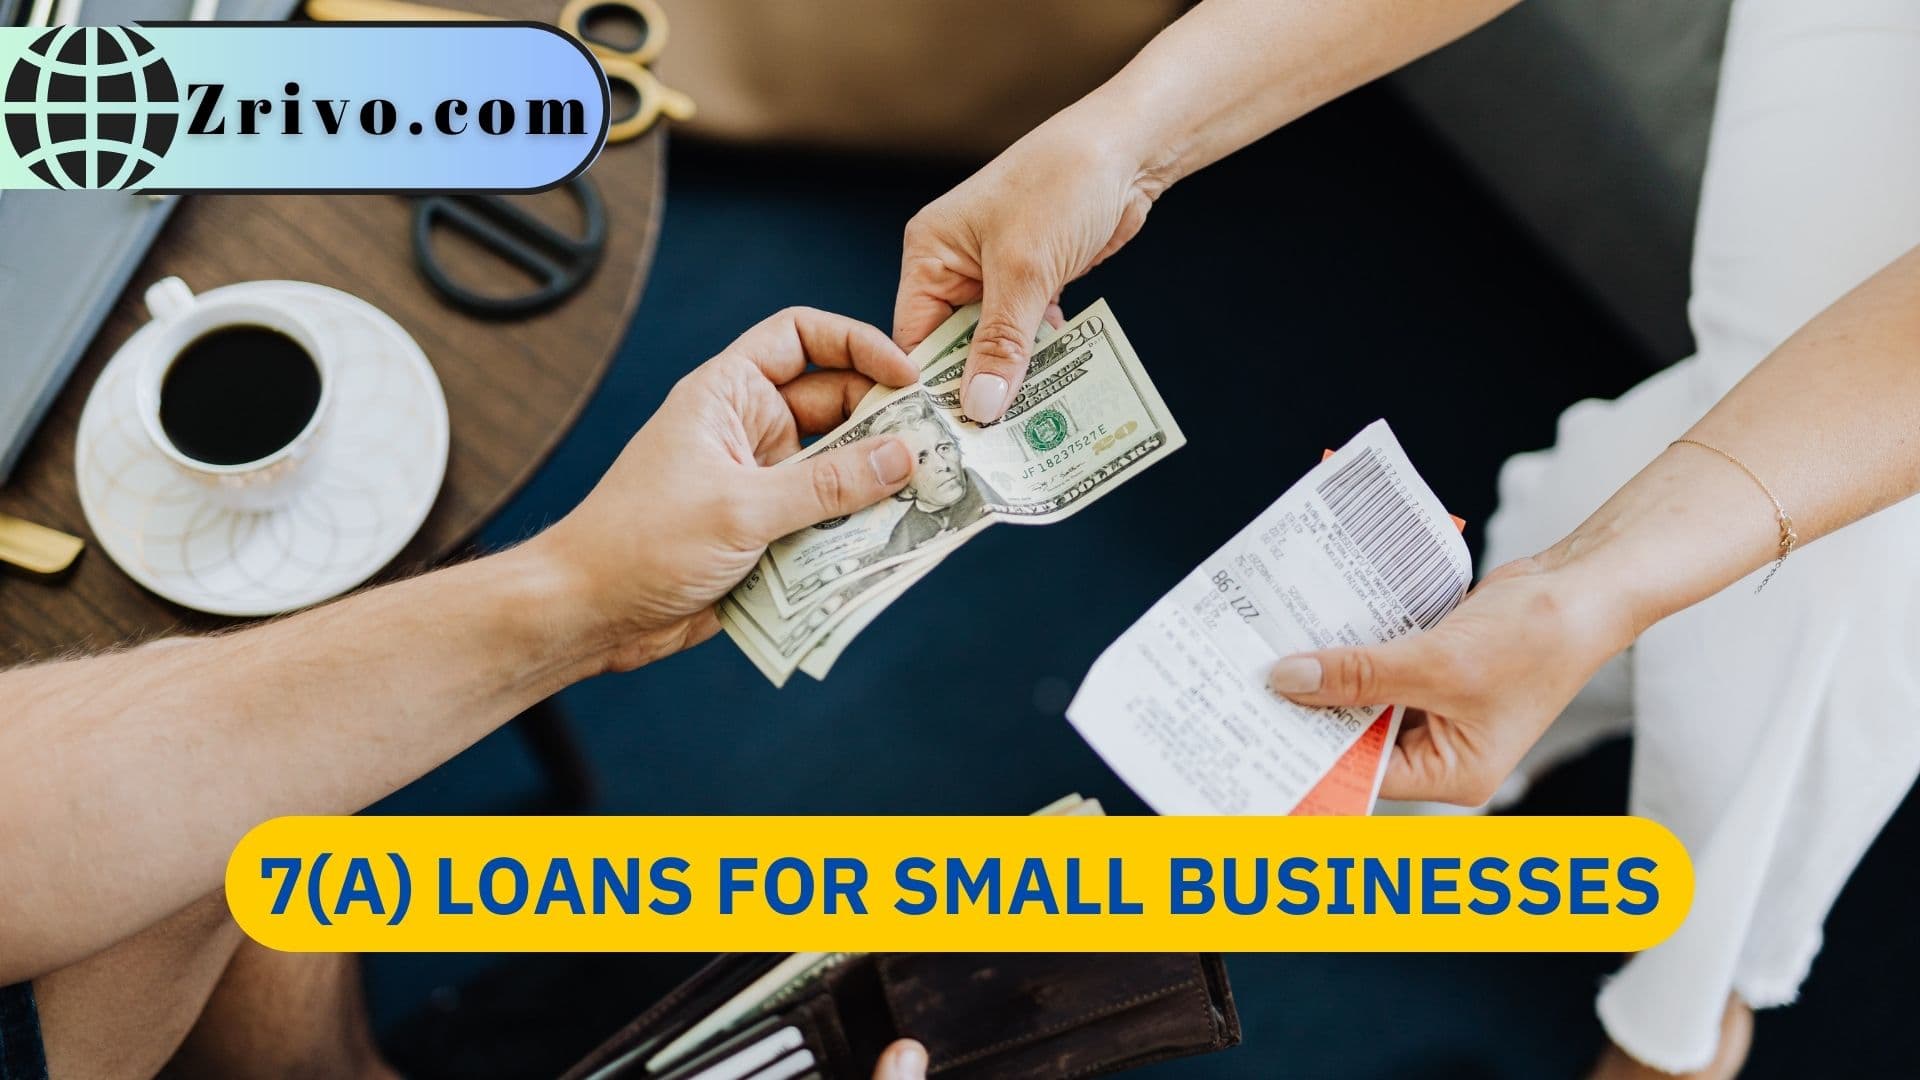 7(a) Loans For Small Businesses